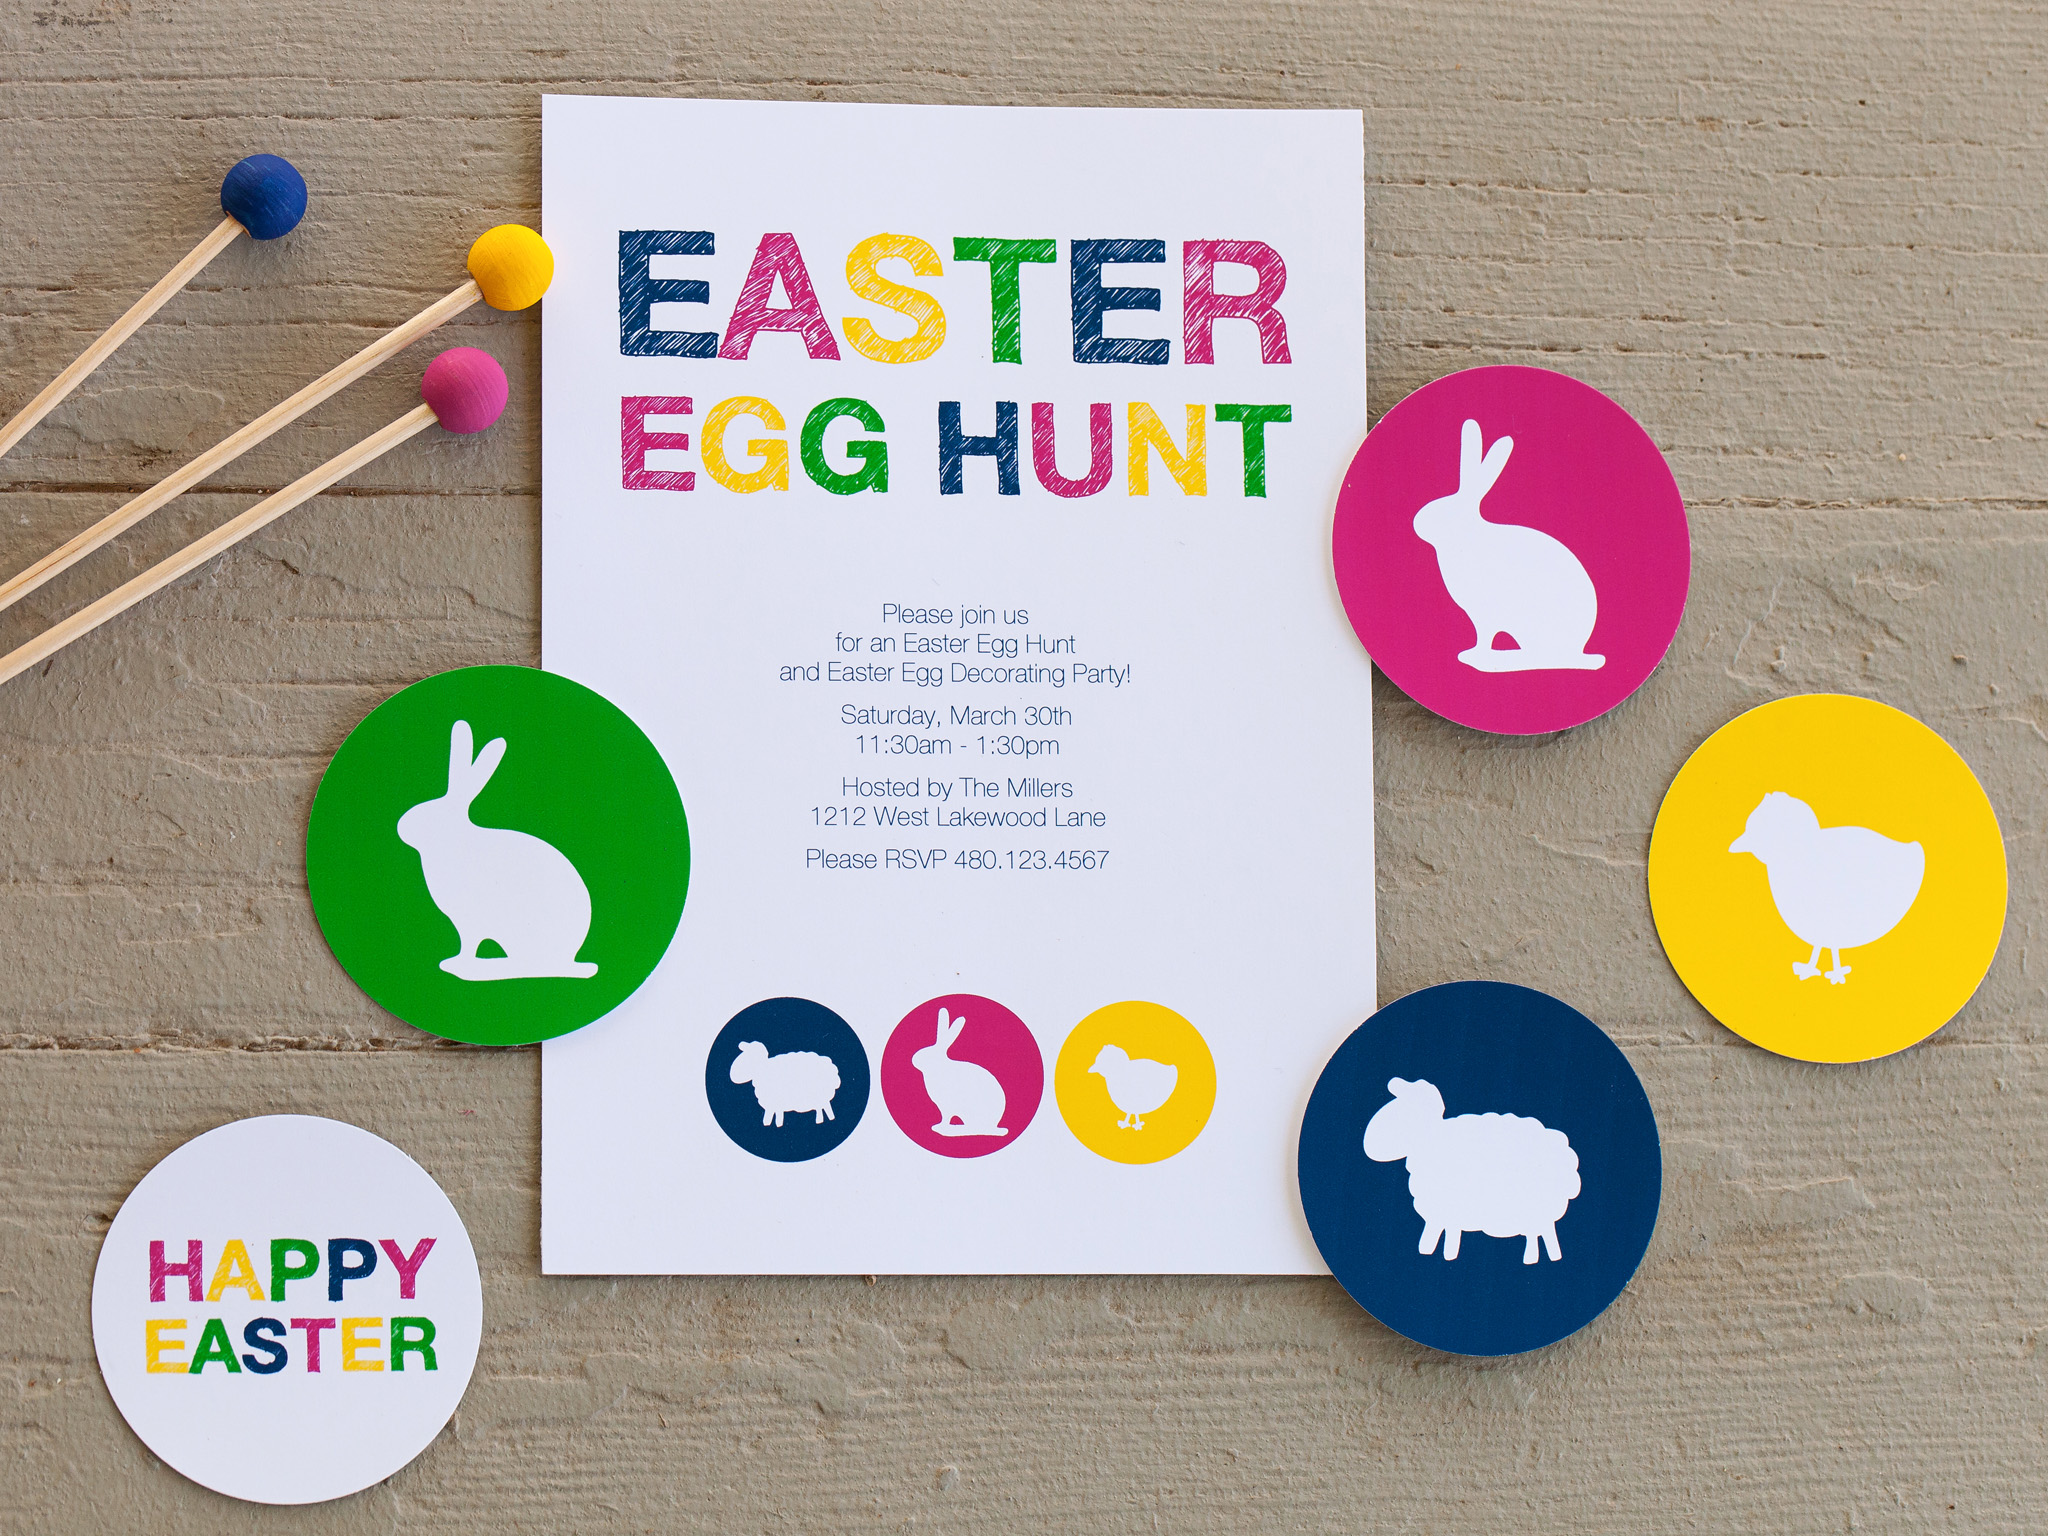 Custom Door Decals Vinyl Stickers Multiple Sizes Happy Easter Egg Hunt Blue Holidays and Occasions Happy Easter Outdoor Luggage & Bumper Stickers for Cars Blue 20X14Inches Set of 10